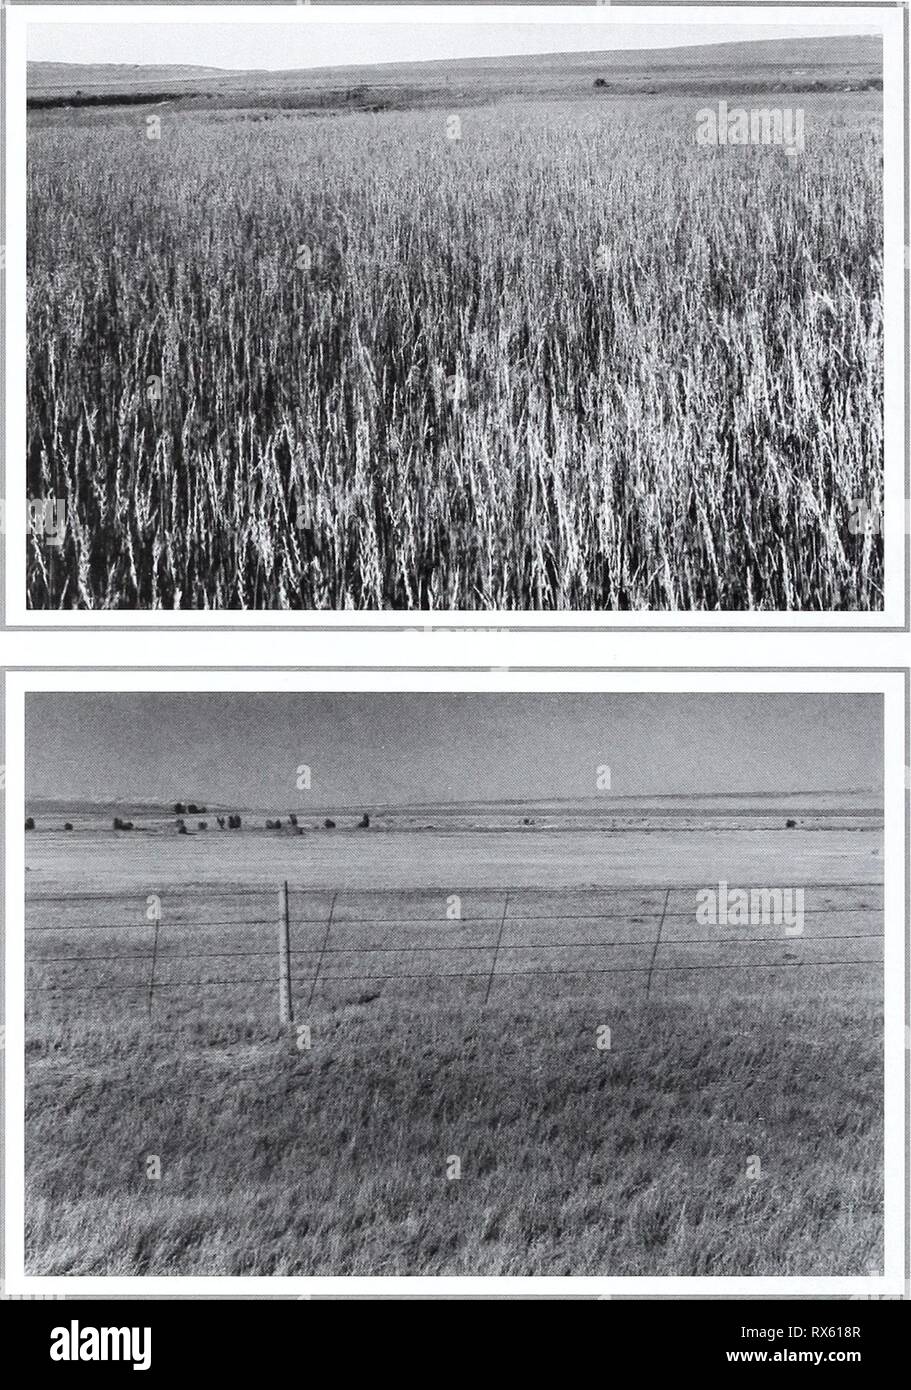 Eighty years of vegetation and Eighty years of vegetation and landscape changes in the Northern Great Plains : a photographic record eightyyearsofveg45klem Year: 2001  Original Photograph July 6, 1927. Shantz V-3-1927. Facing east. First Retake and Description August 11, 1960. W.S.P., E-8-1960. Dr. Shantz' original picture shows an almost pure stand of Agropyron smithii. When the 1960 picture was taken there was very little of this grass, there being mainly Koeleria cristata (from Phillips 1963, p. 129). Second Retake August 3, 1998. Kay-4358-15. Stock Photo